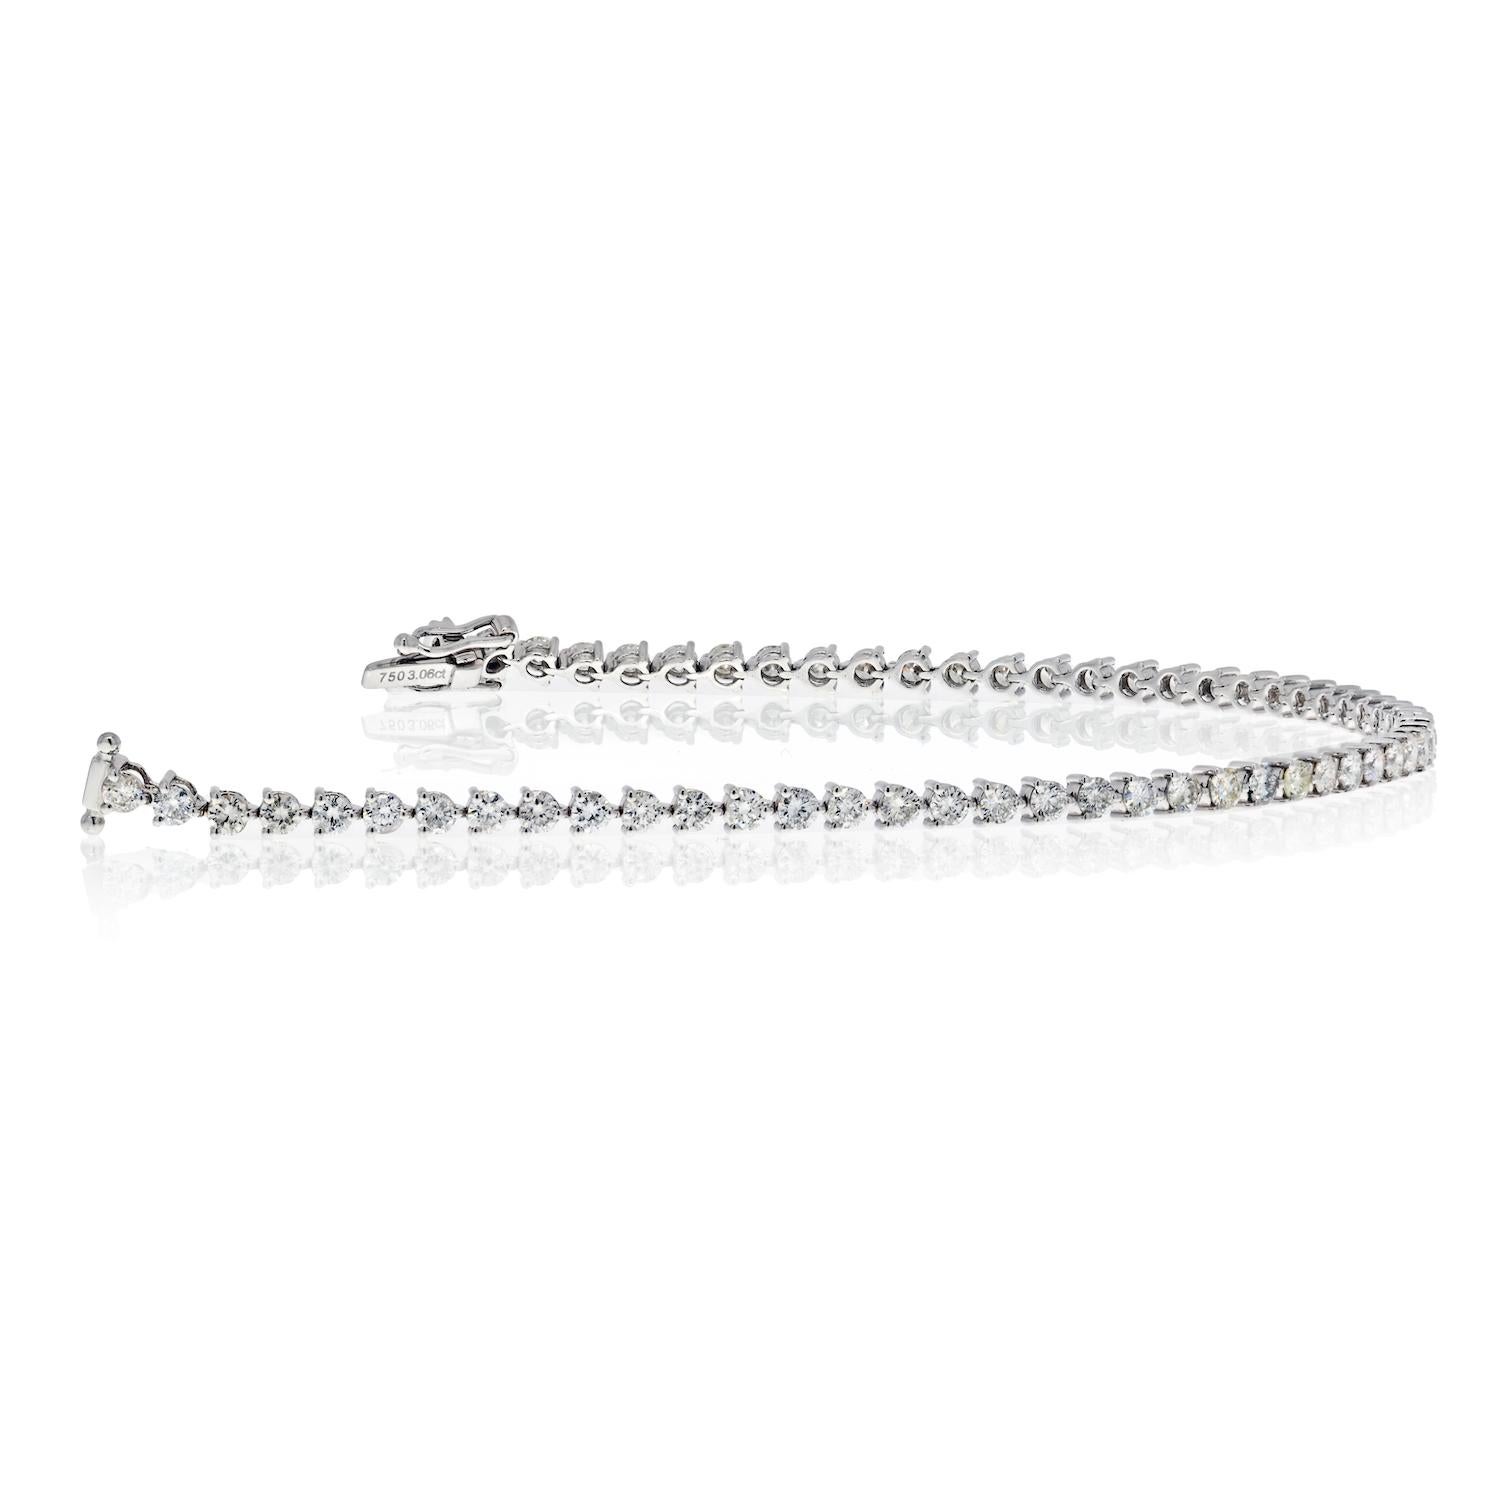 Delicate, beautiful, and elegant natural Diamond box chain tennis bracelet. All of the stones are mounted on four prongs and are ideal brilliant-cut for optimal sparkle and shine. Bracelets have the gold karat and diamond carat stamped/engraved on